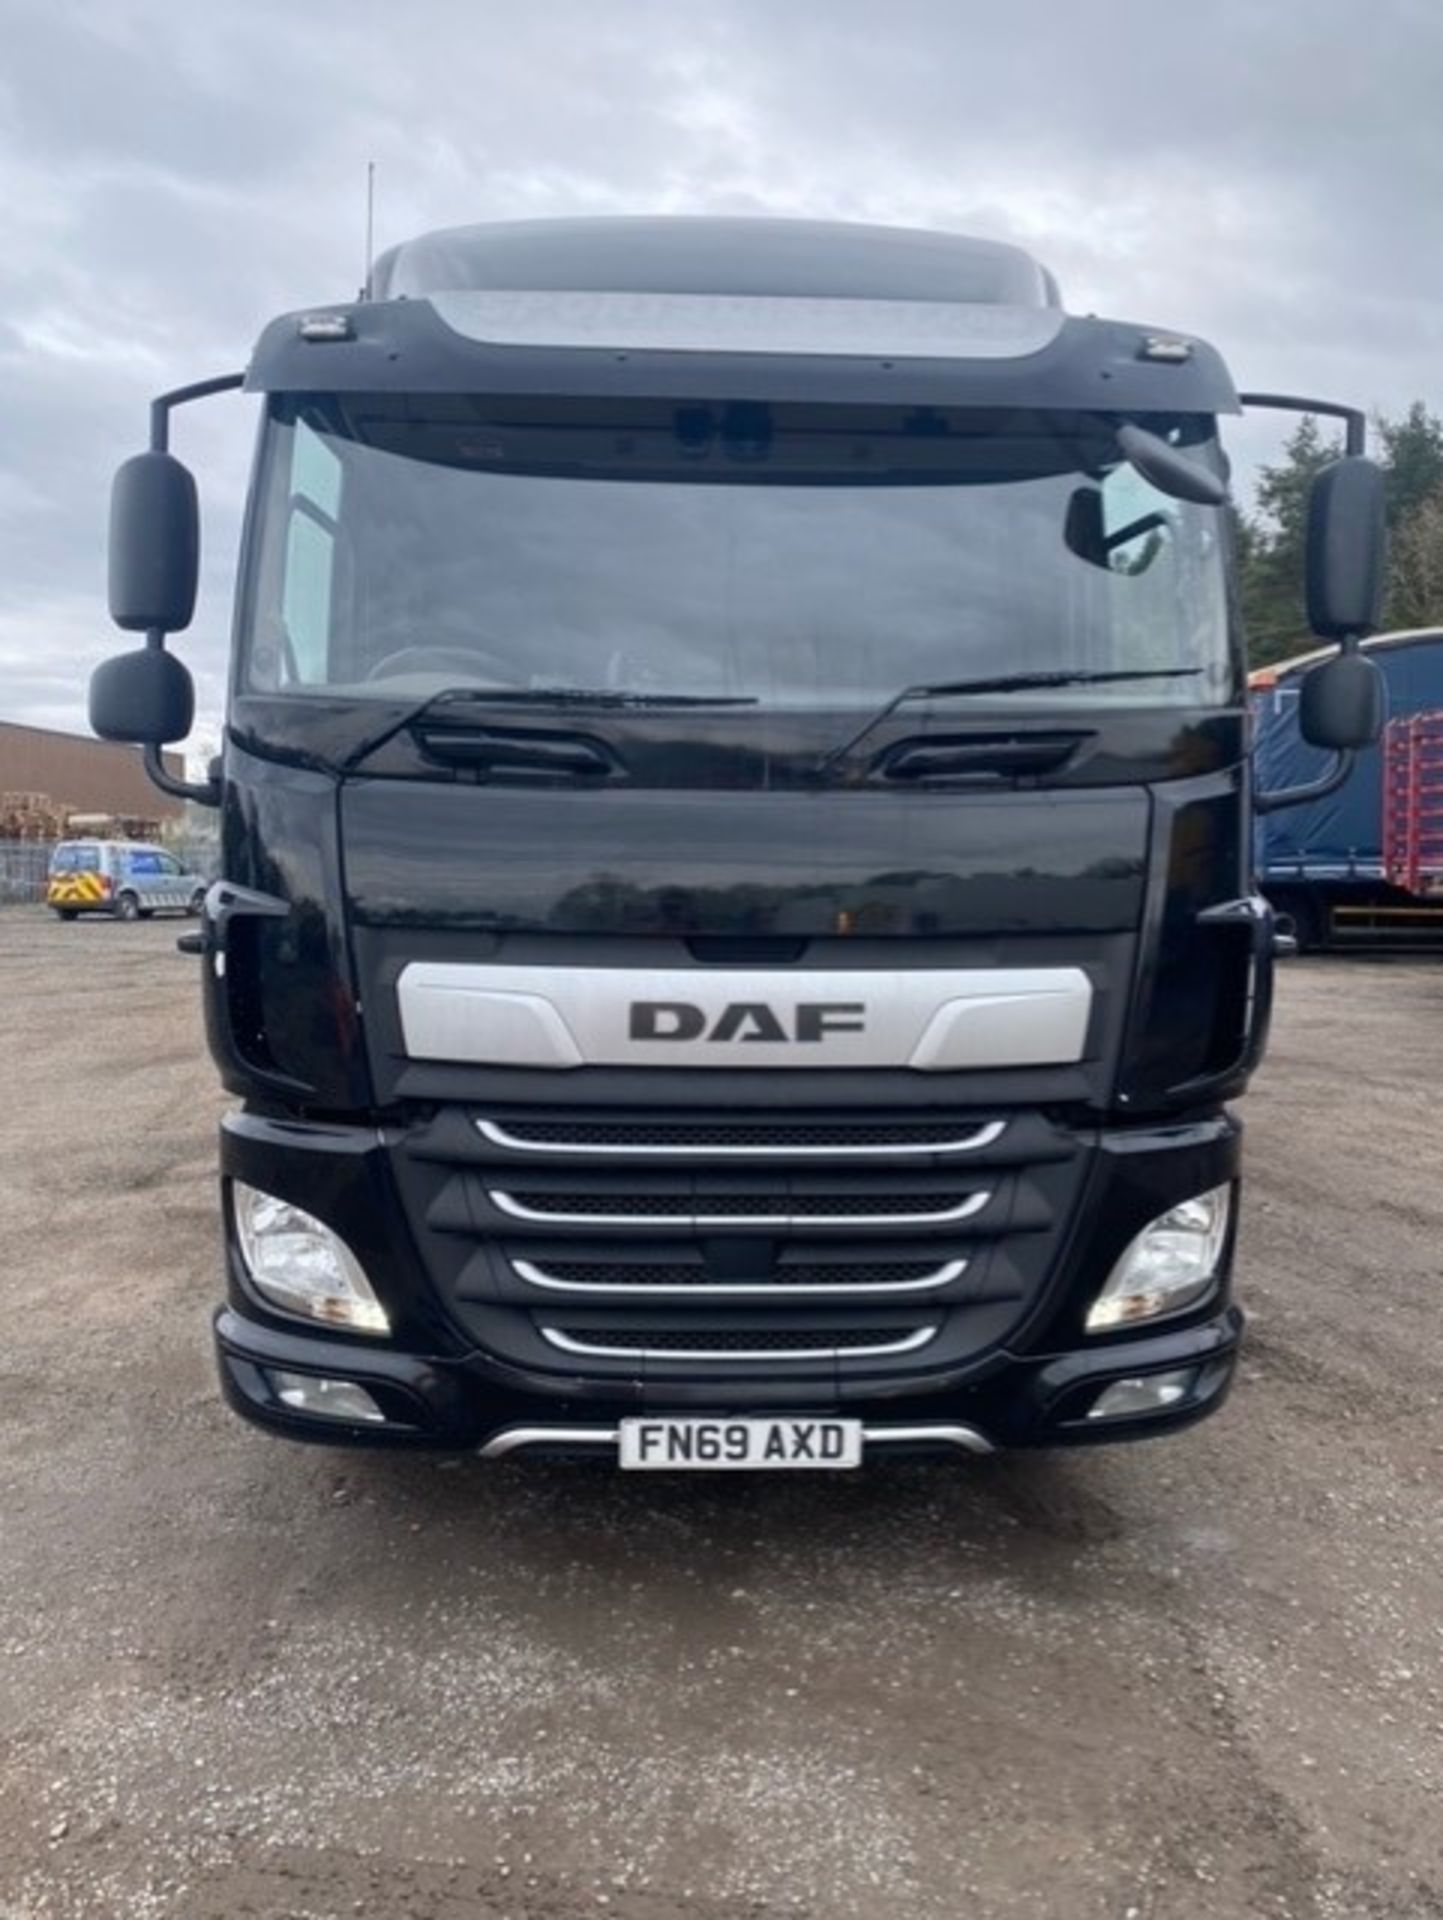 2019, DAF CF 260 FA (Ex-Fleet Owned & Maintained) - FN69 AXD (18 Ton Rigid Truck with Tail Lift) - Bild 4 aus 20